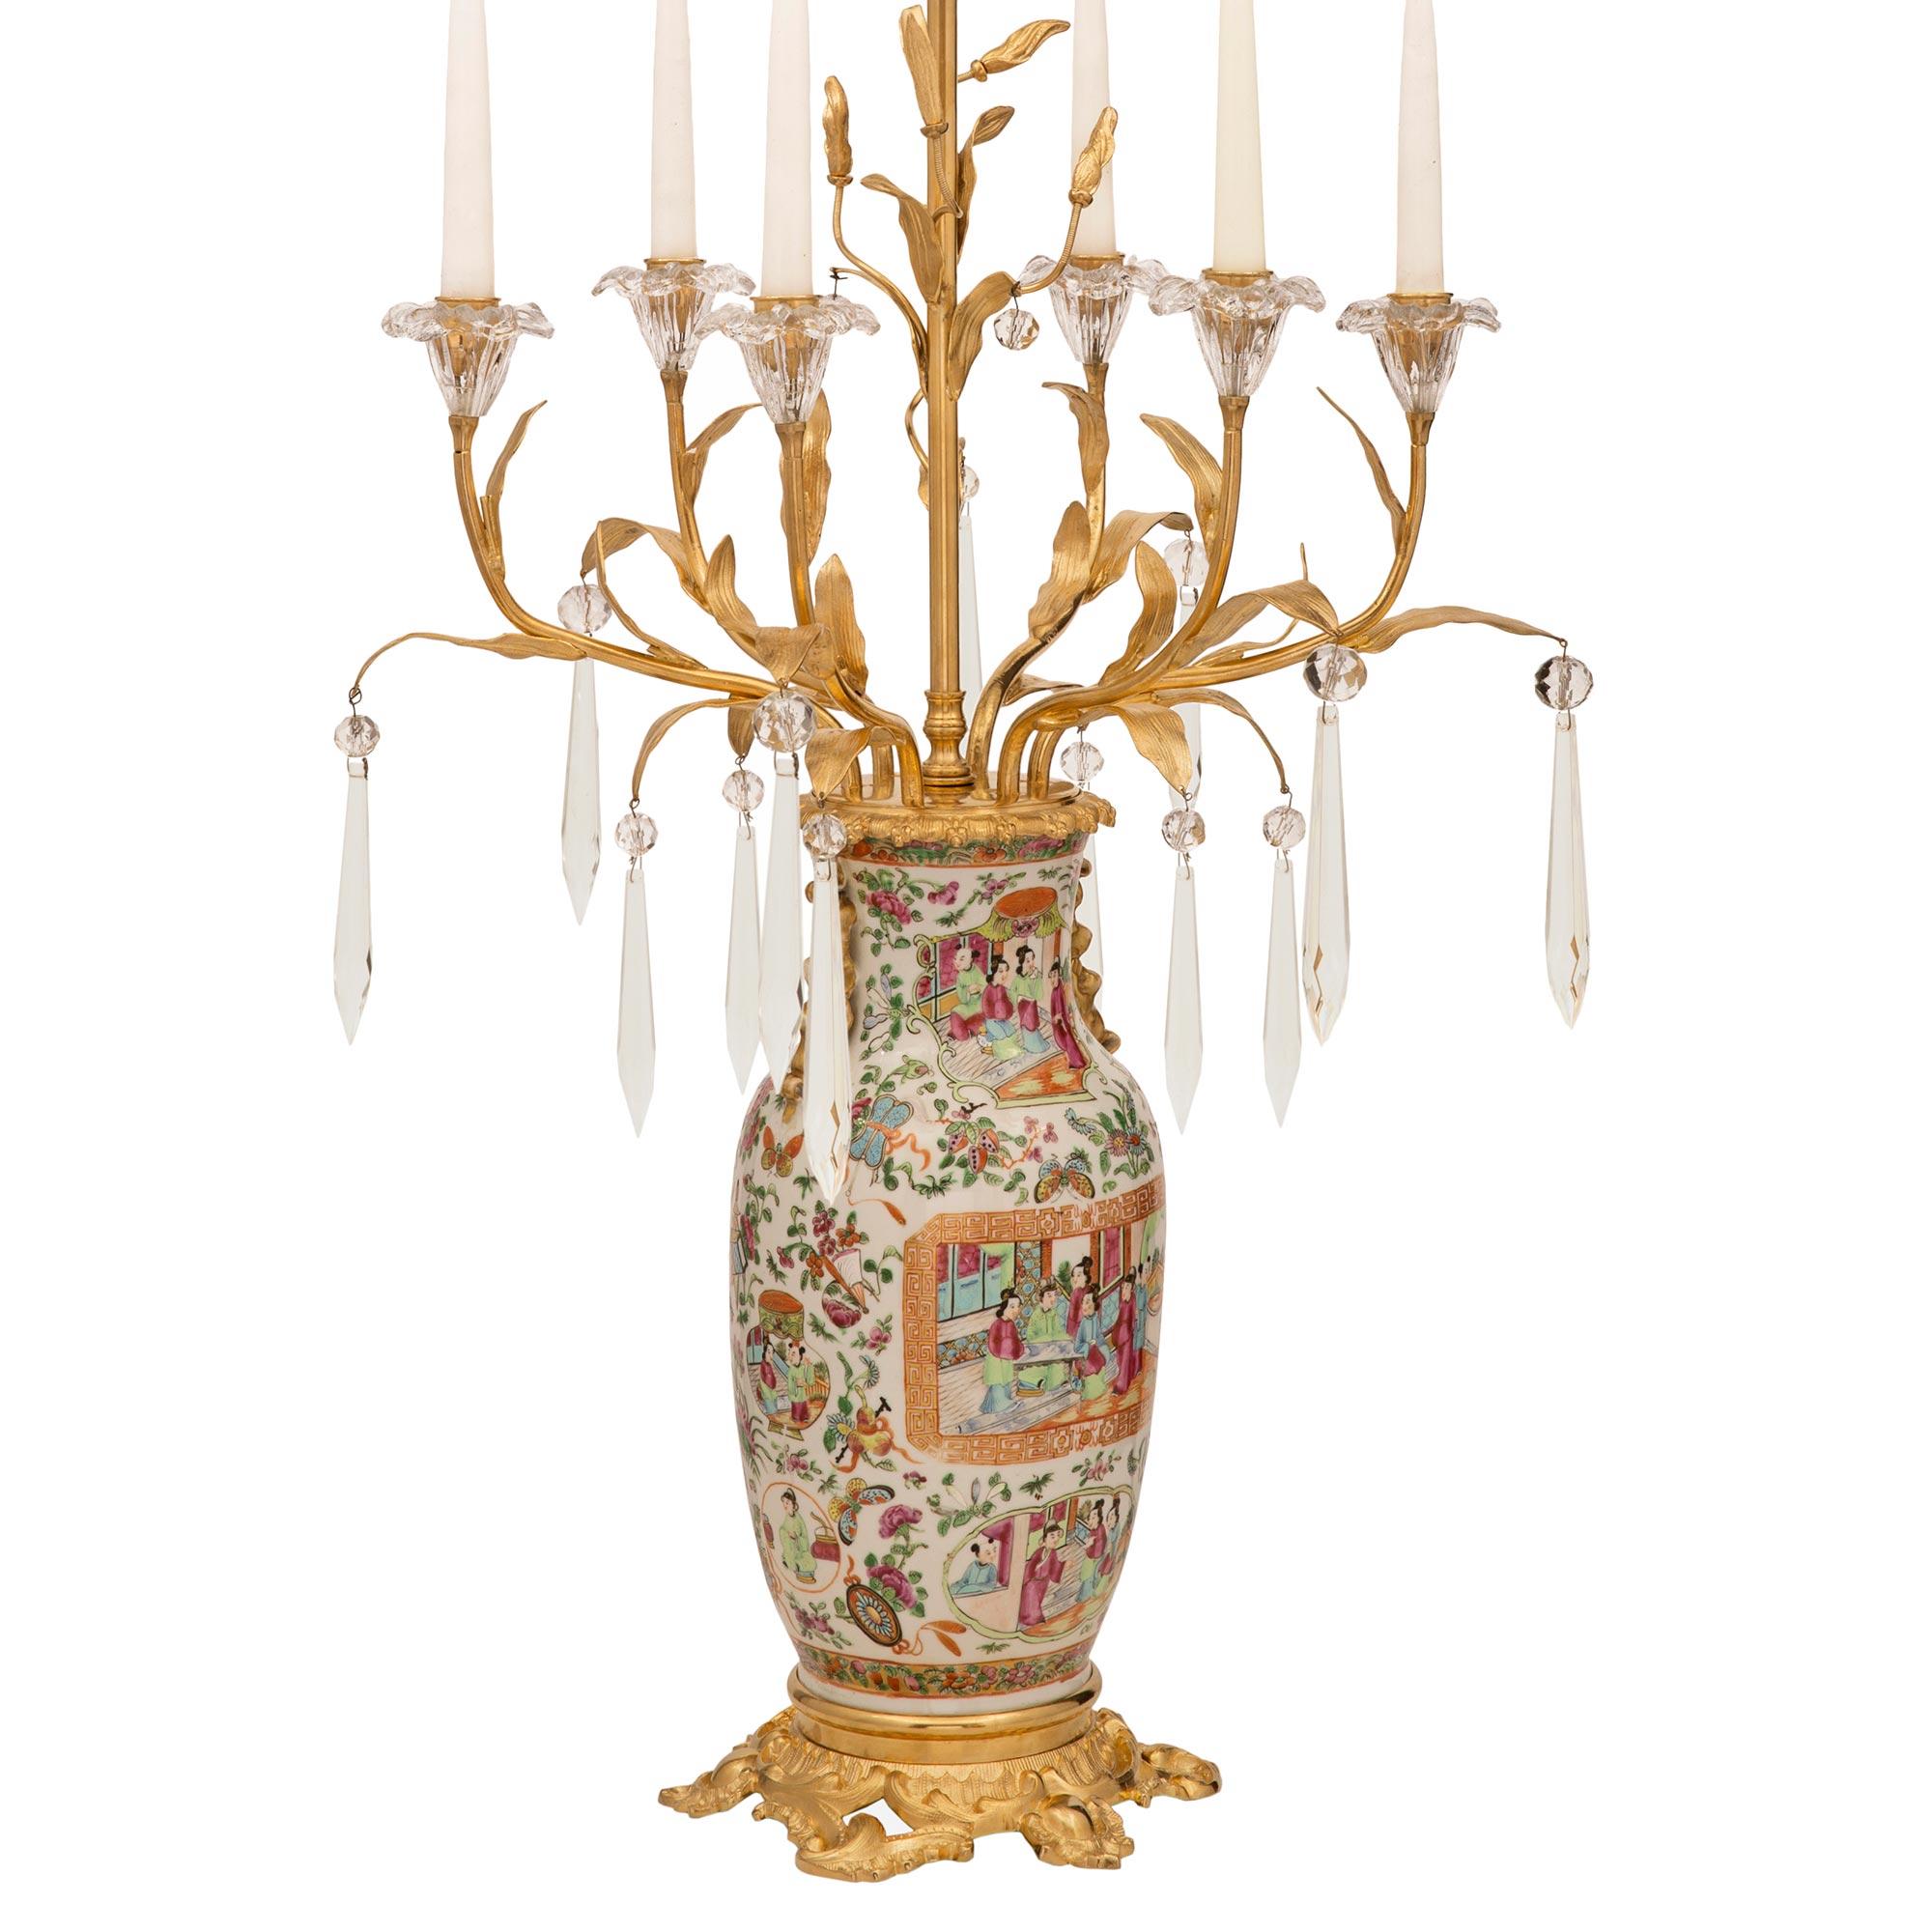 An impressive and extremely decorative pair of French and Asian collaboration 19th century Louis XV st. Famille Rose porcelain, crystal, and ormolu lamps. Each lamp is raised by an elegant and richly chased pieced ormolu base with beautiful scrolled